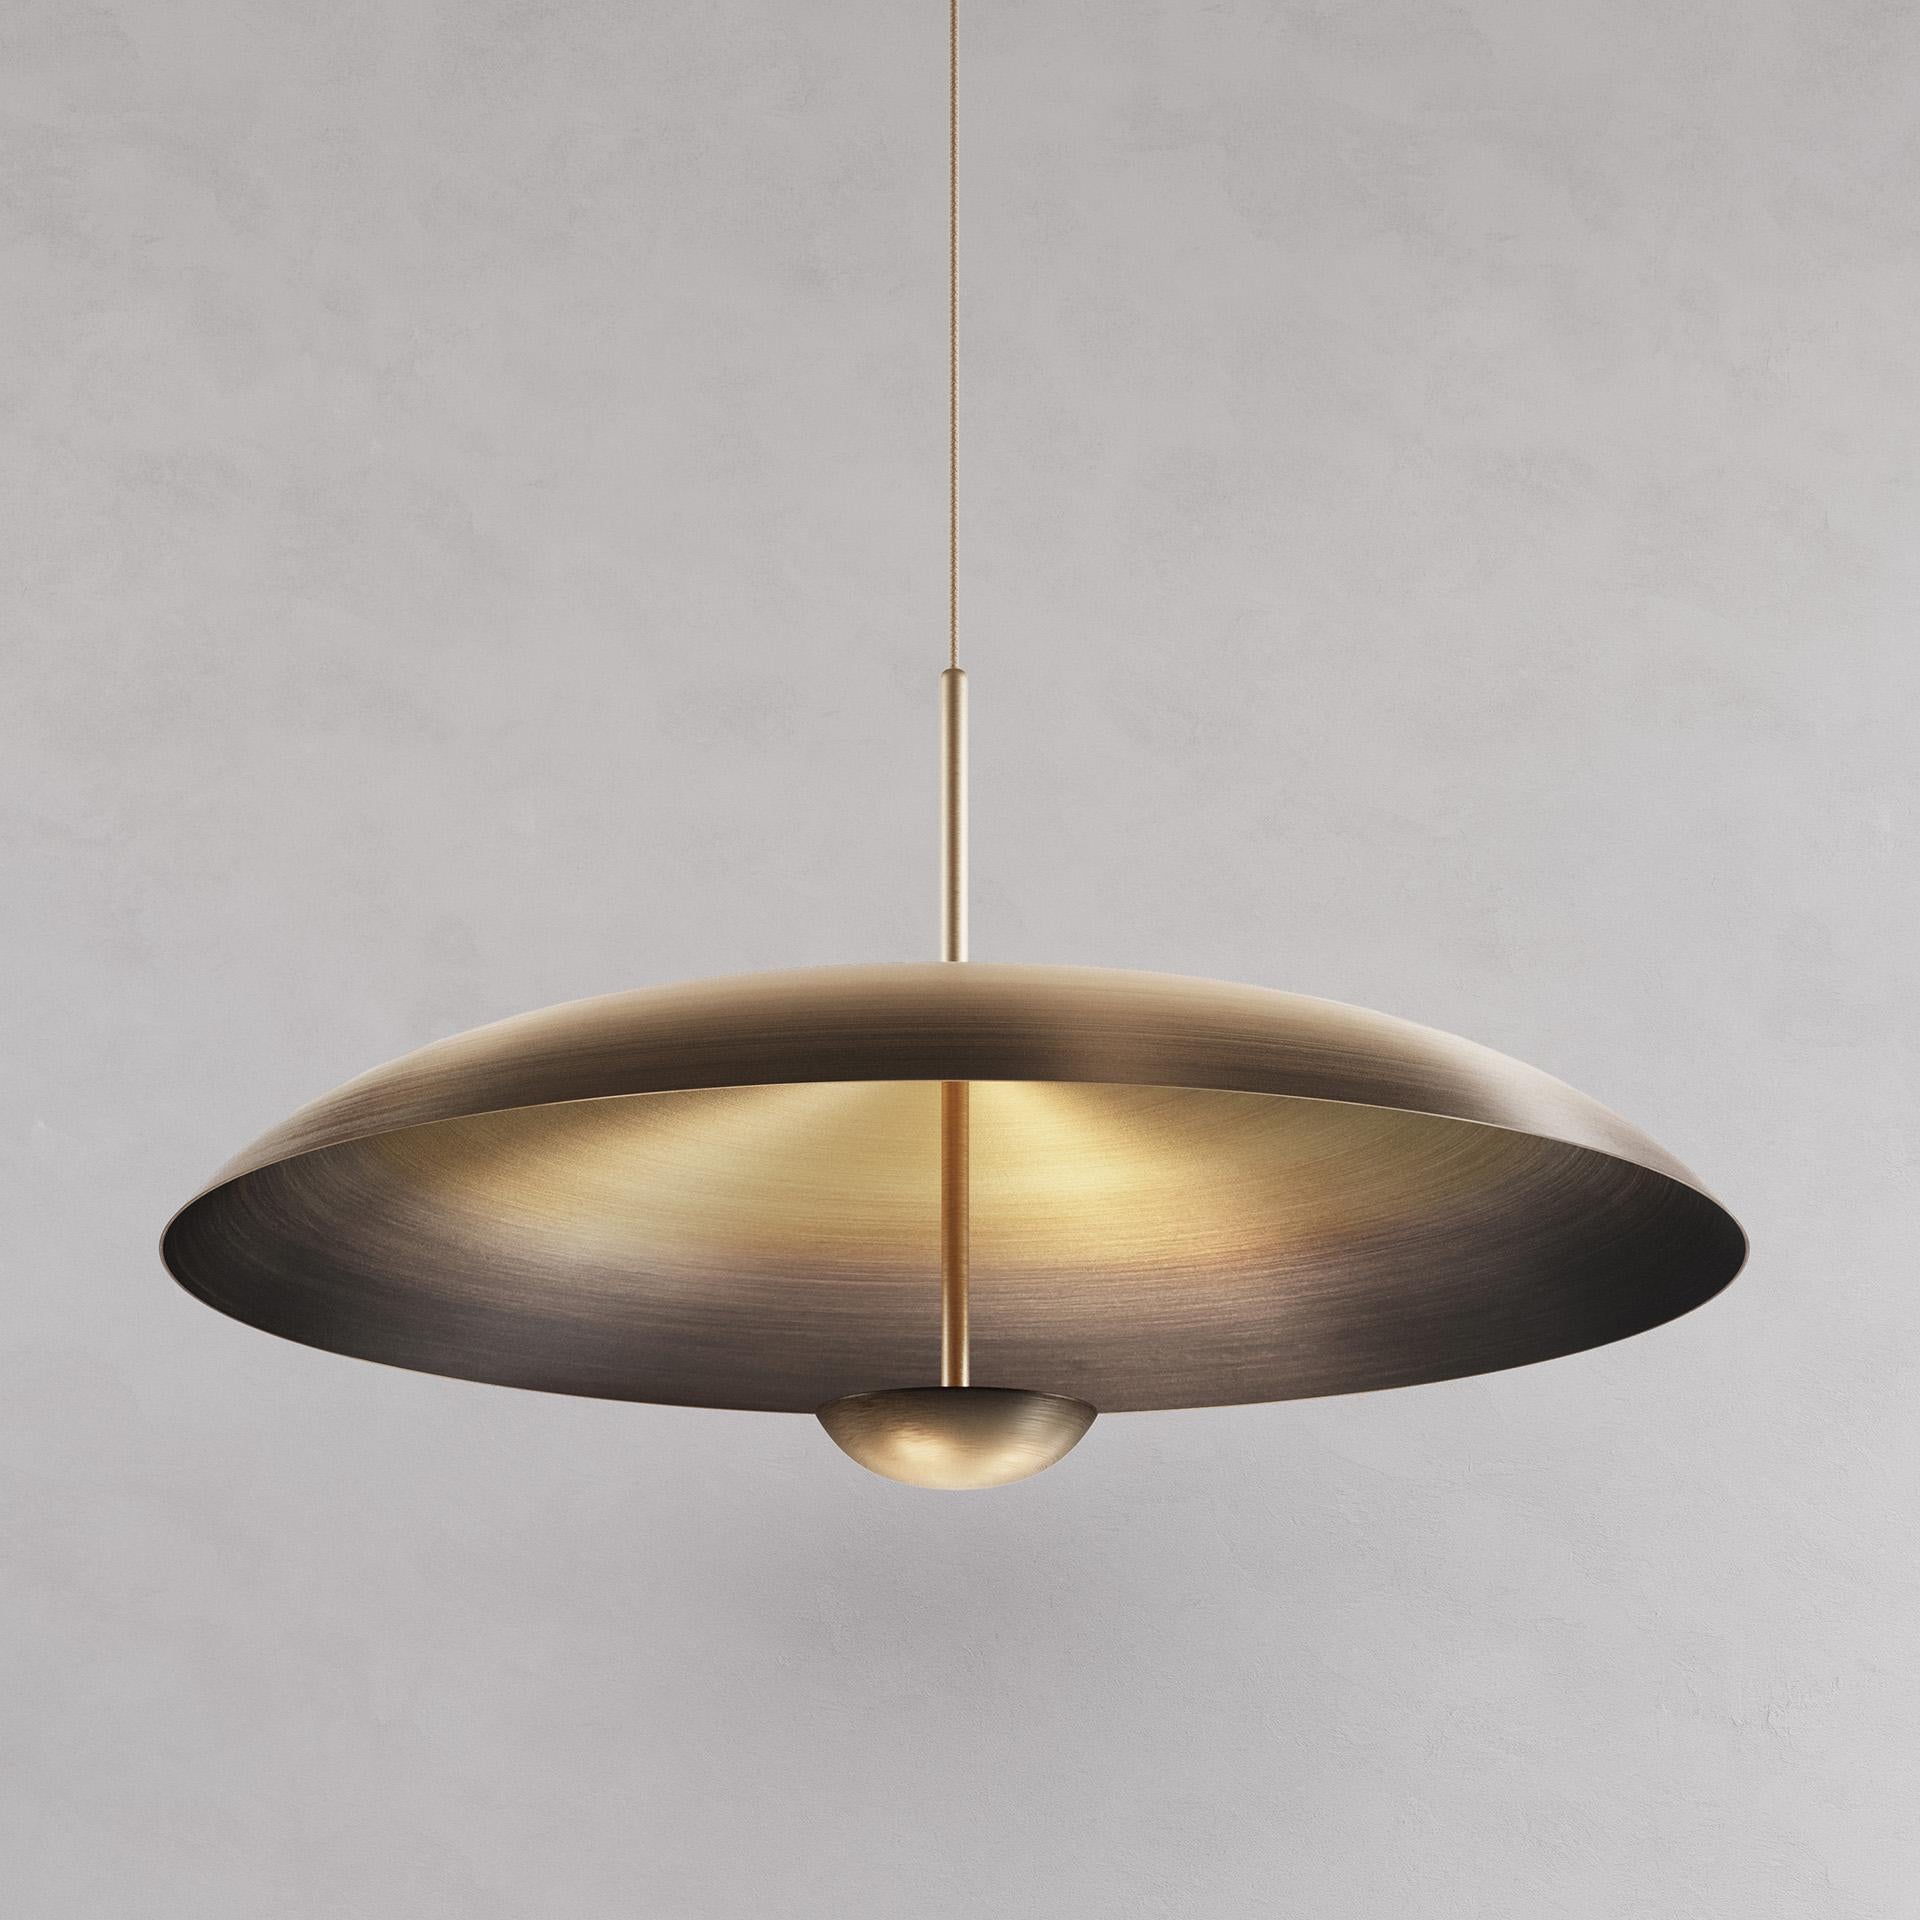 English Ore Pendant 100 by Atelier001